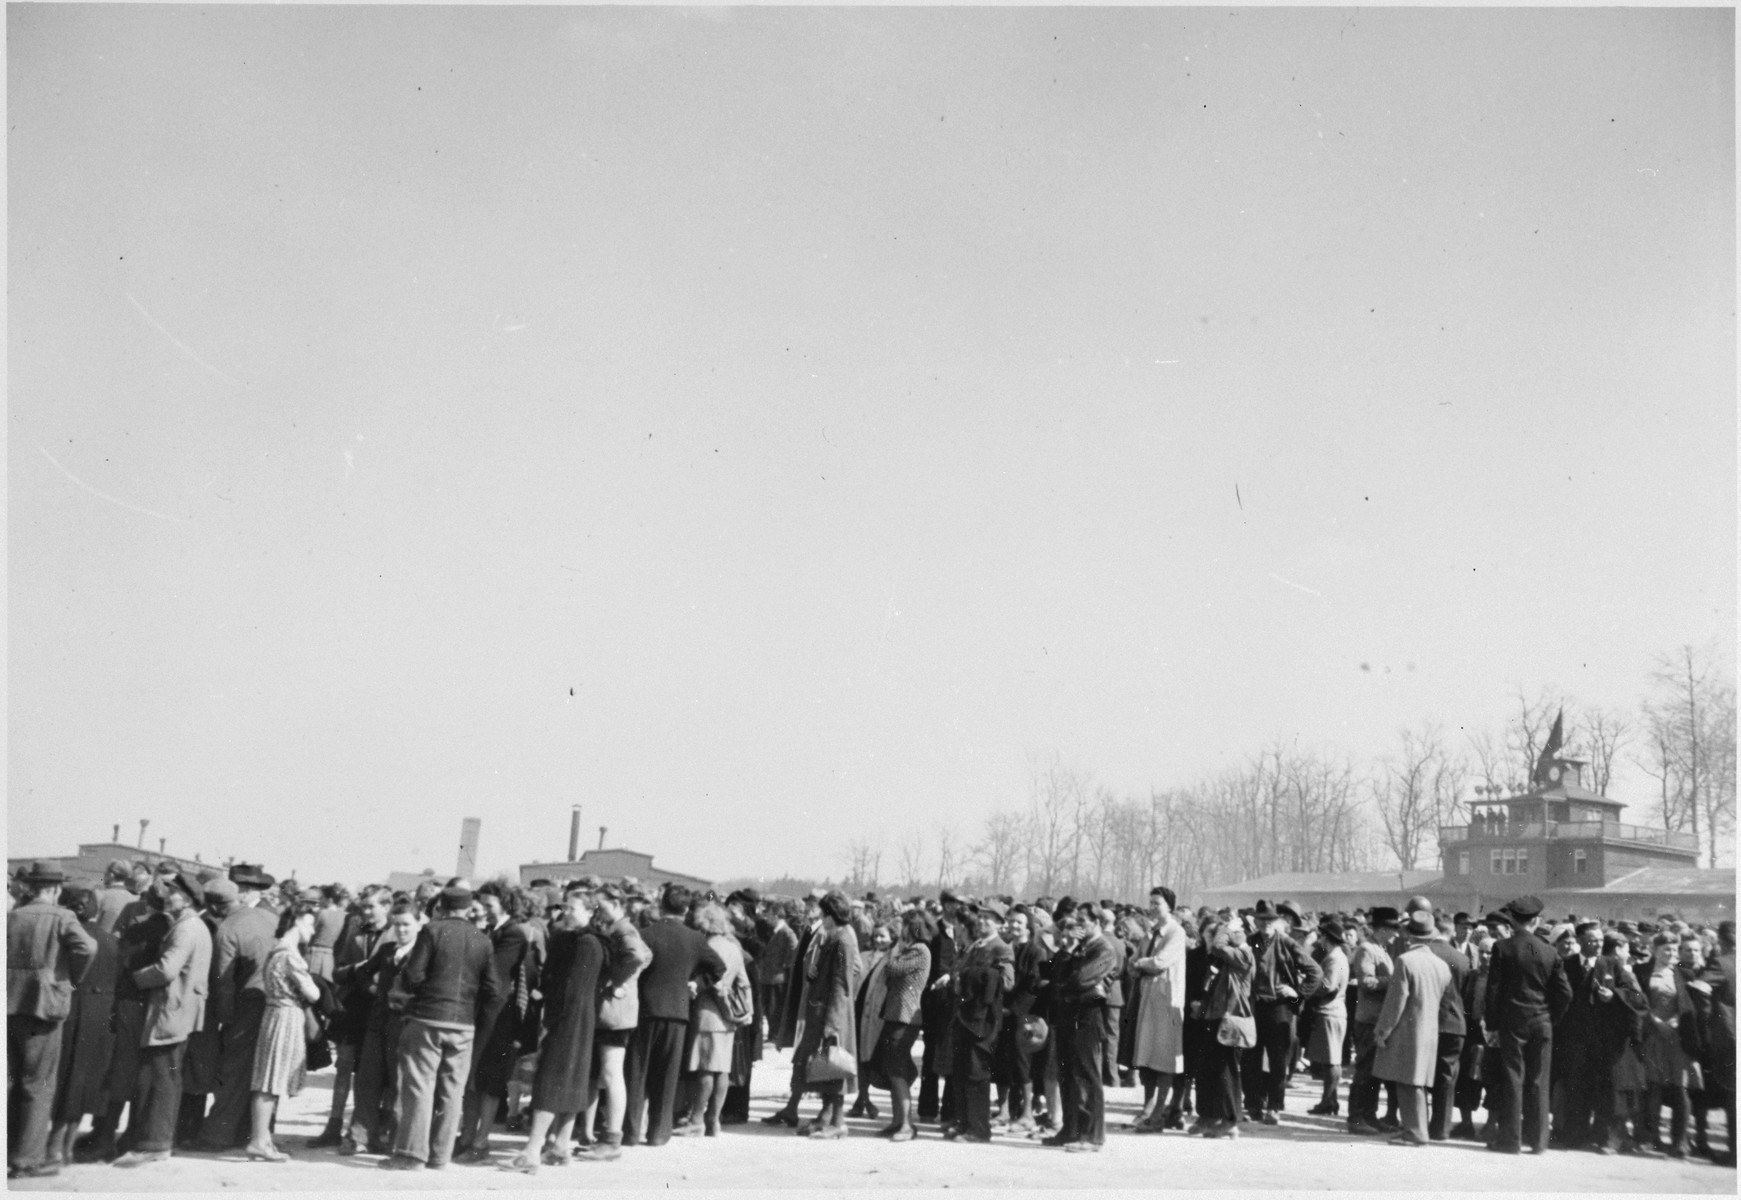 German civilians are forced to wait in-line to tour the Buchenwald concentration camp.

The original caption reads, "General Patton requested that over 1200 residents of Weimar visit the camp [Buchenwald] and see the horrors which had been wrought upon the political prisoners by the Gestapo".